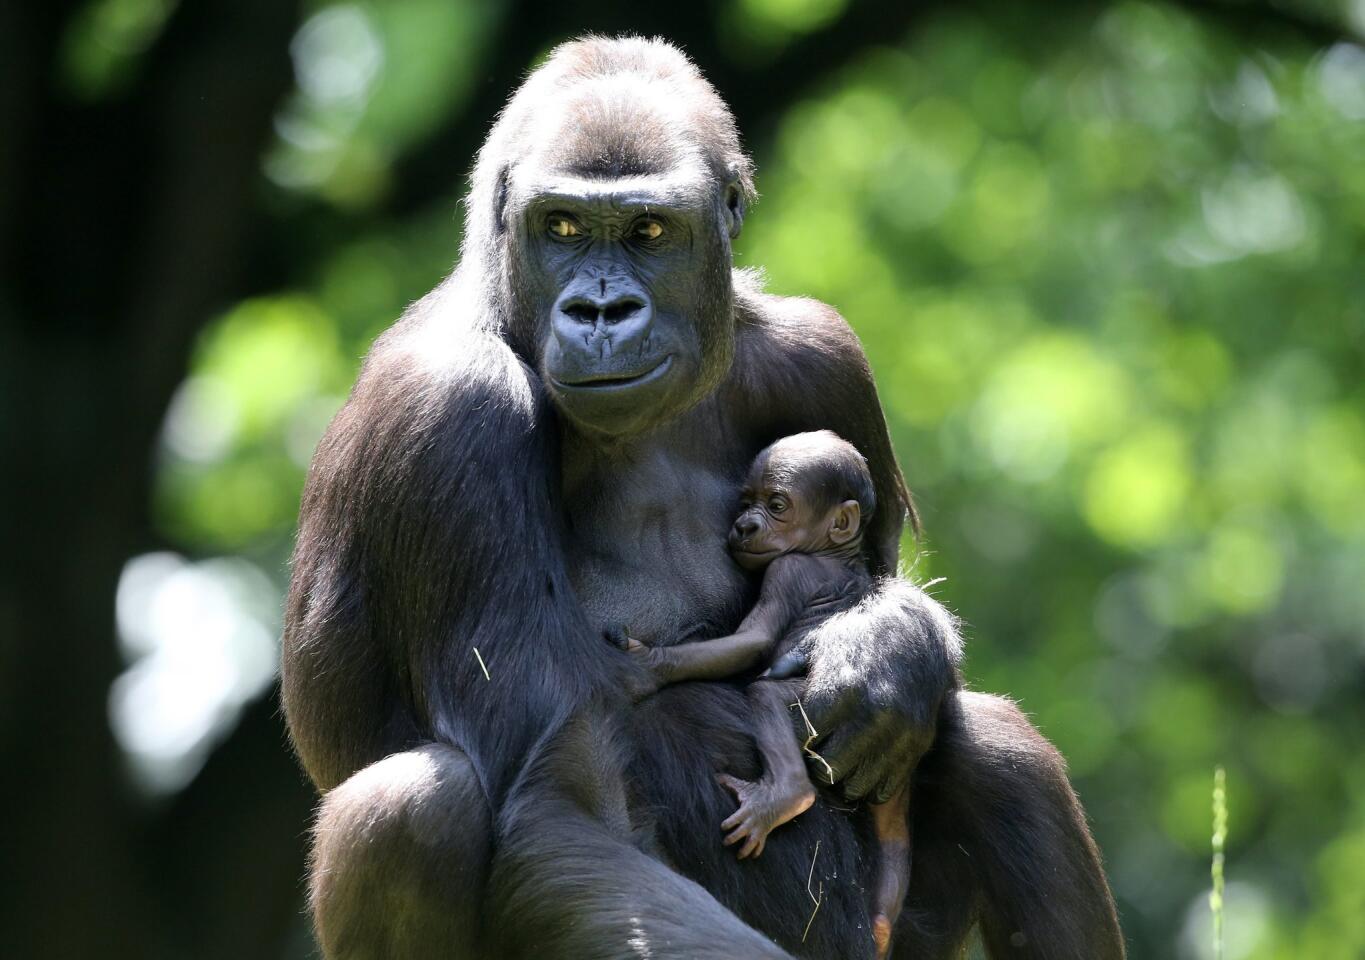 Gorilla mother Safiri holds her still nameless 1-week-old baby at the zoo in Duisburg, Germany, on June 10, 2016.